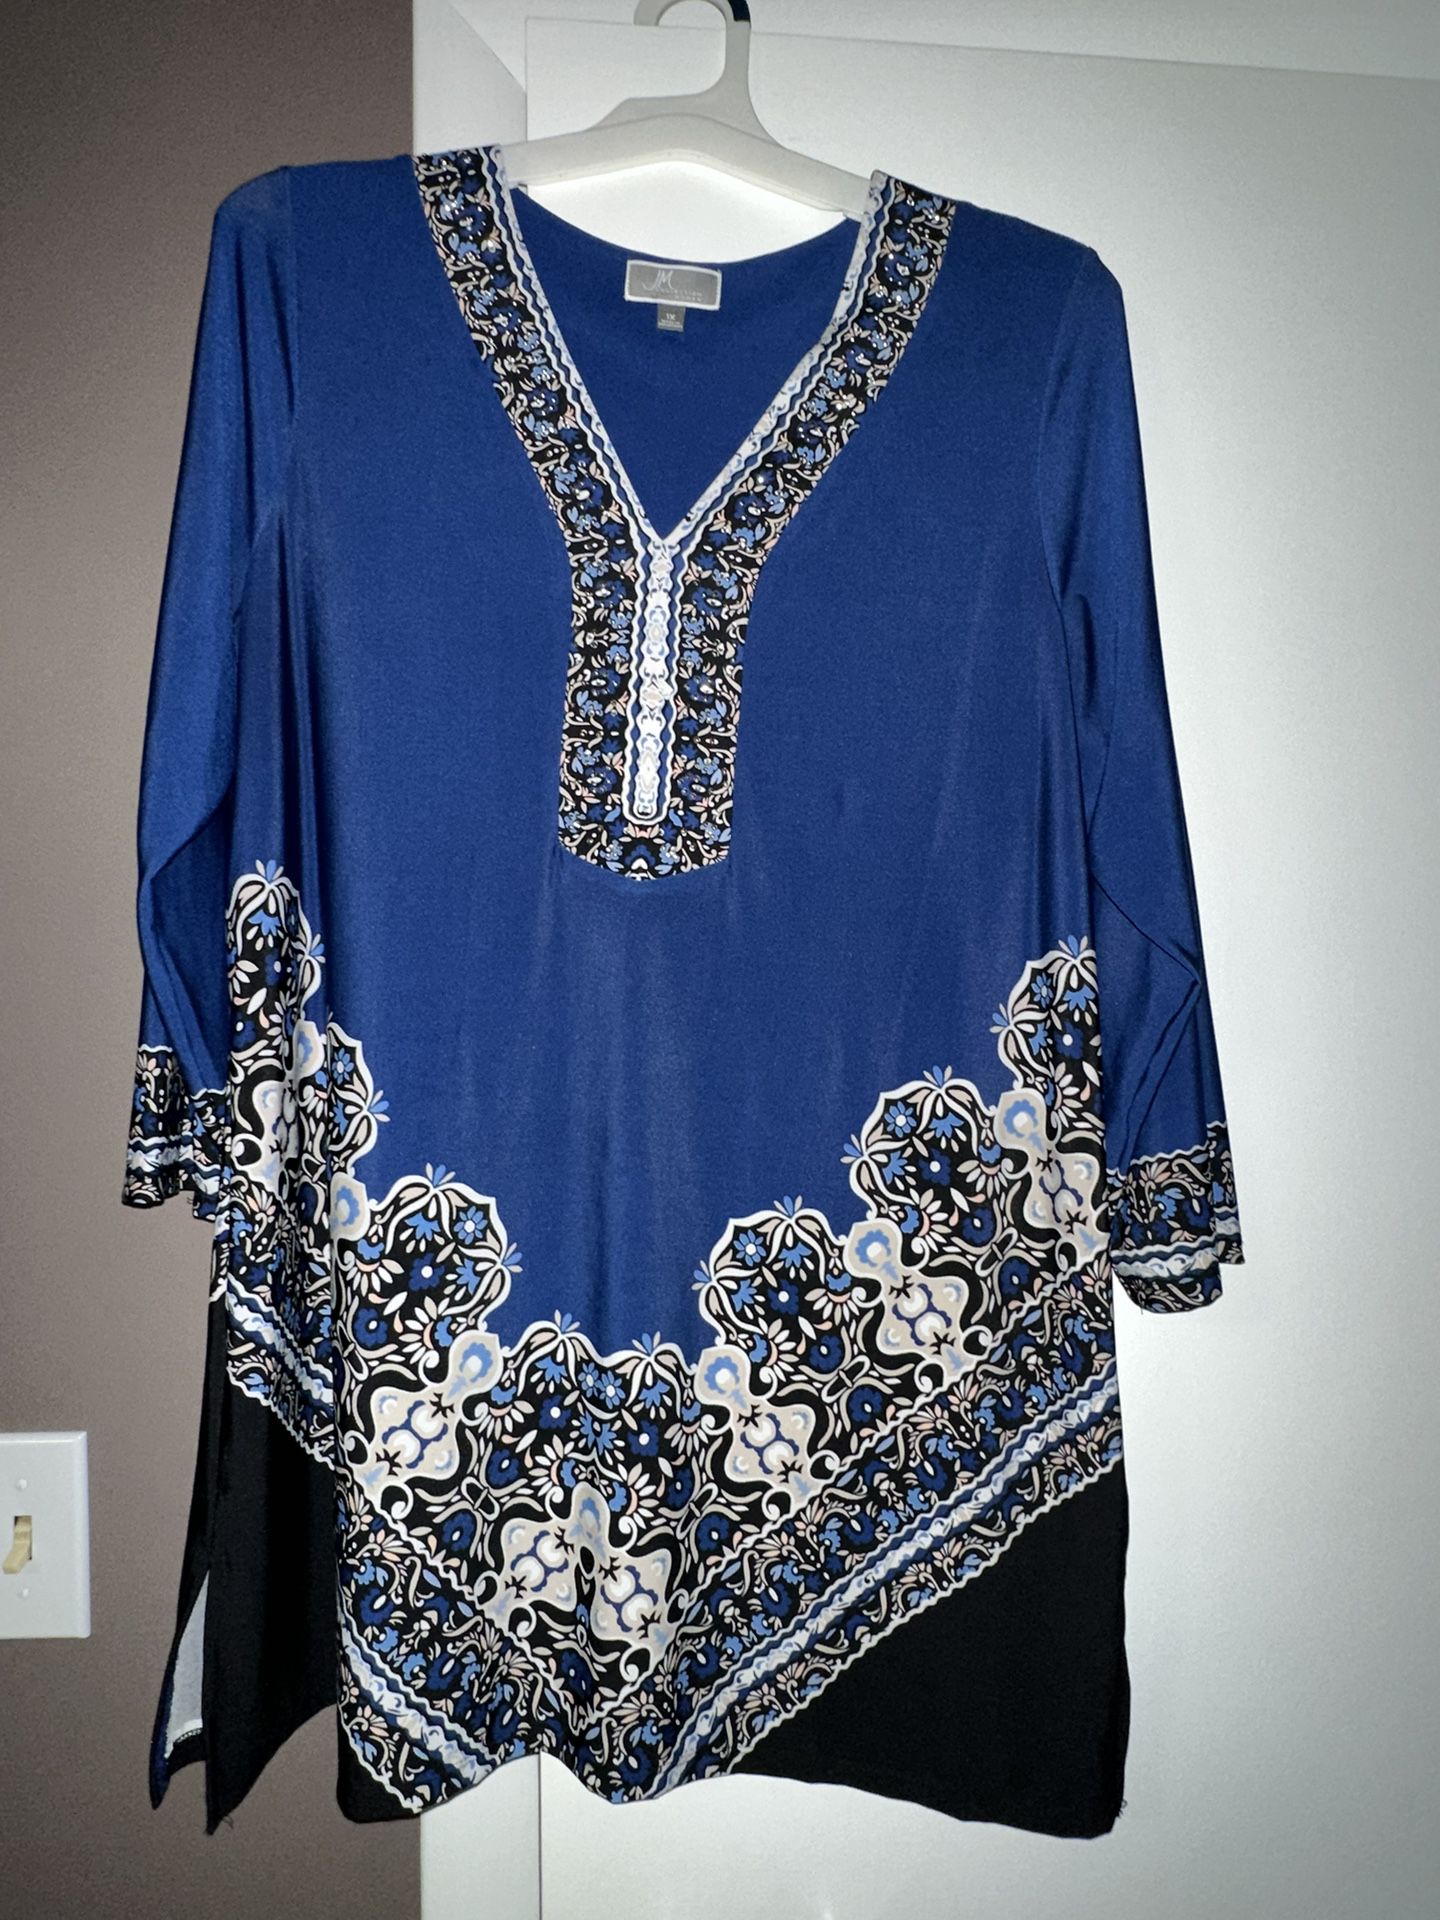 Beautiful Shirt - JM Collection (from Macy’s) - Color:  Blue, White & Black - Size 1X 